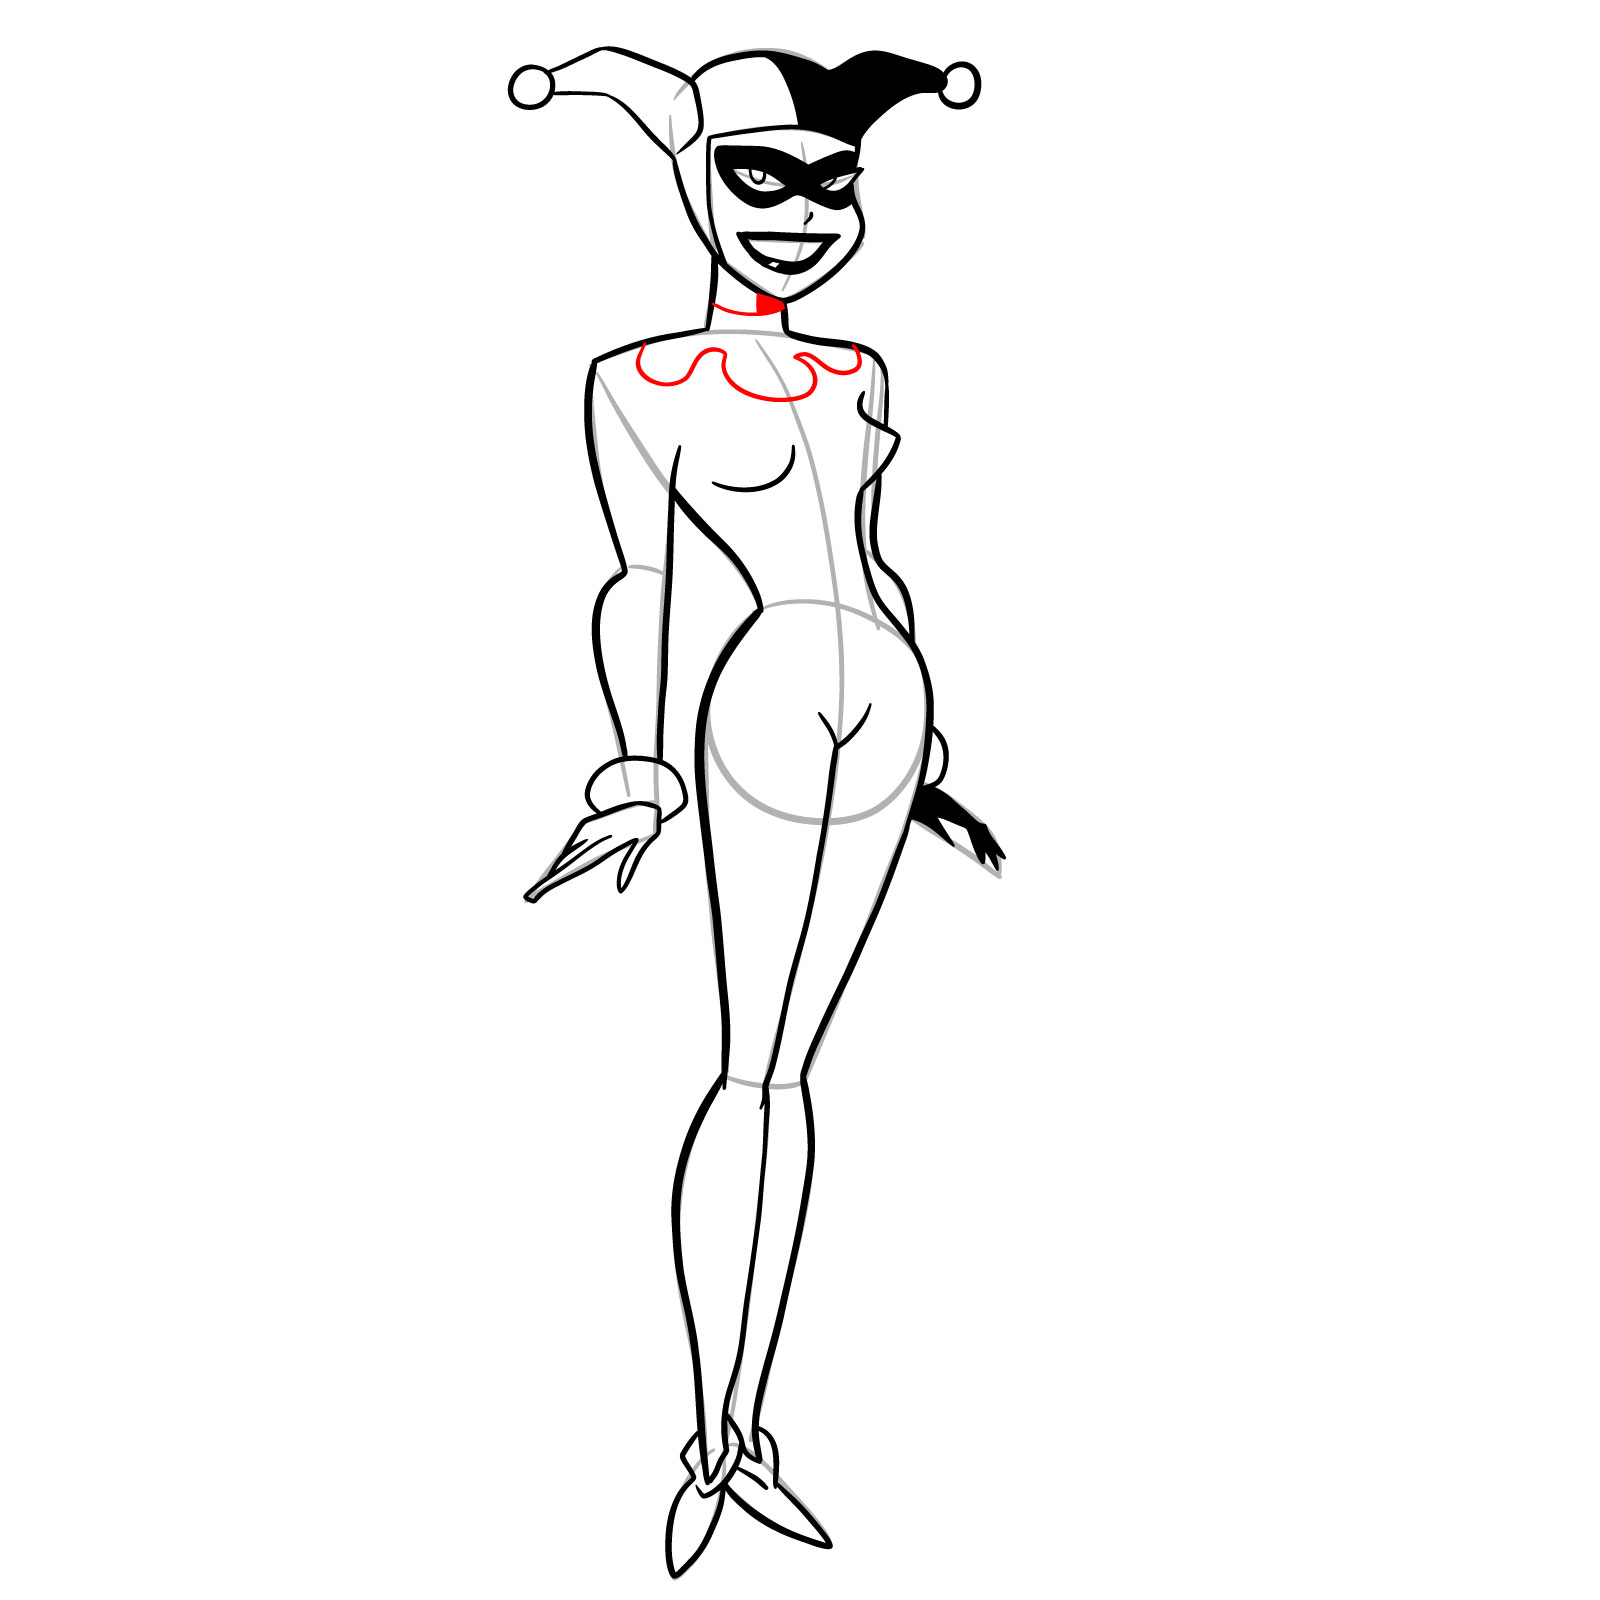 How to draw Harley Quinn in a classic suit - step 22